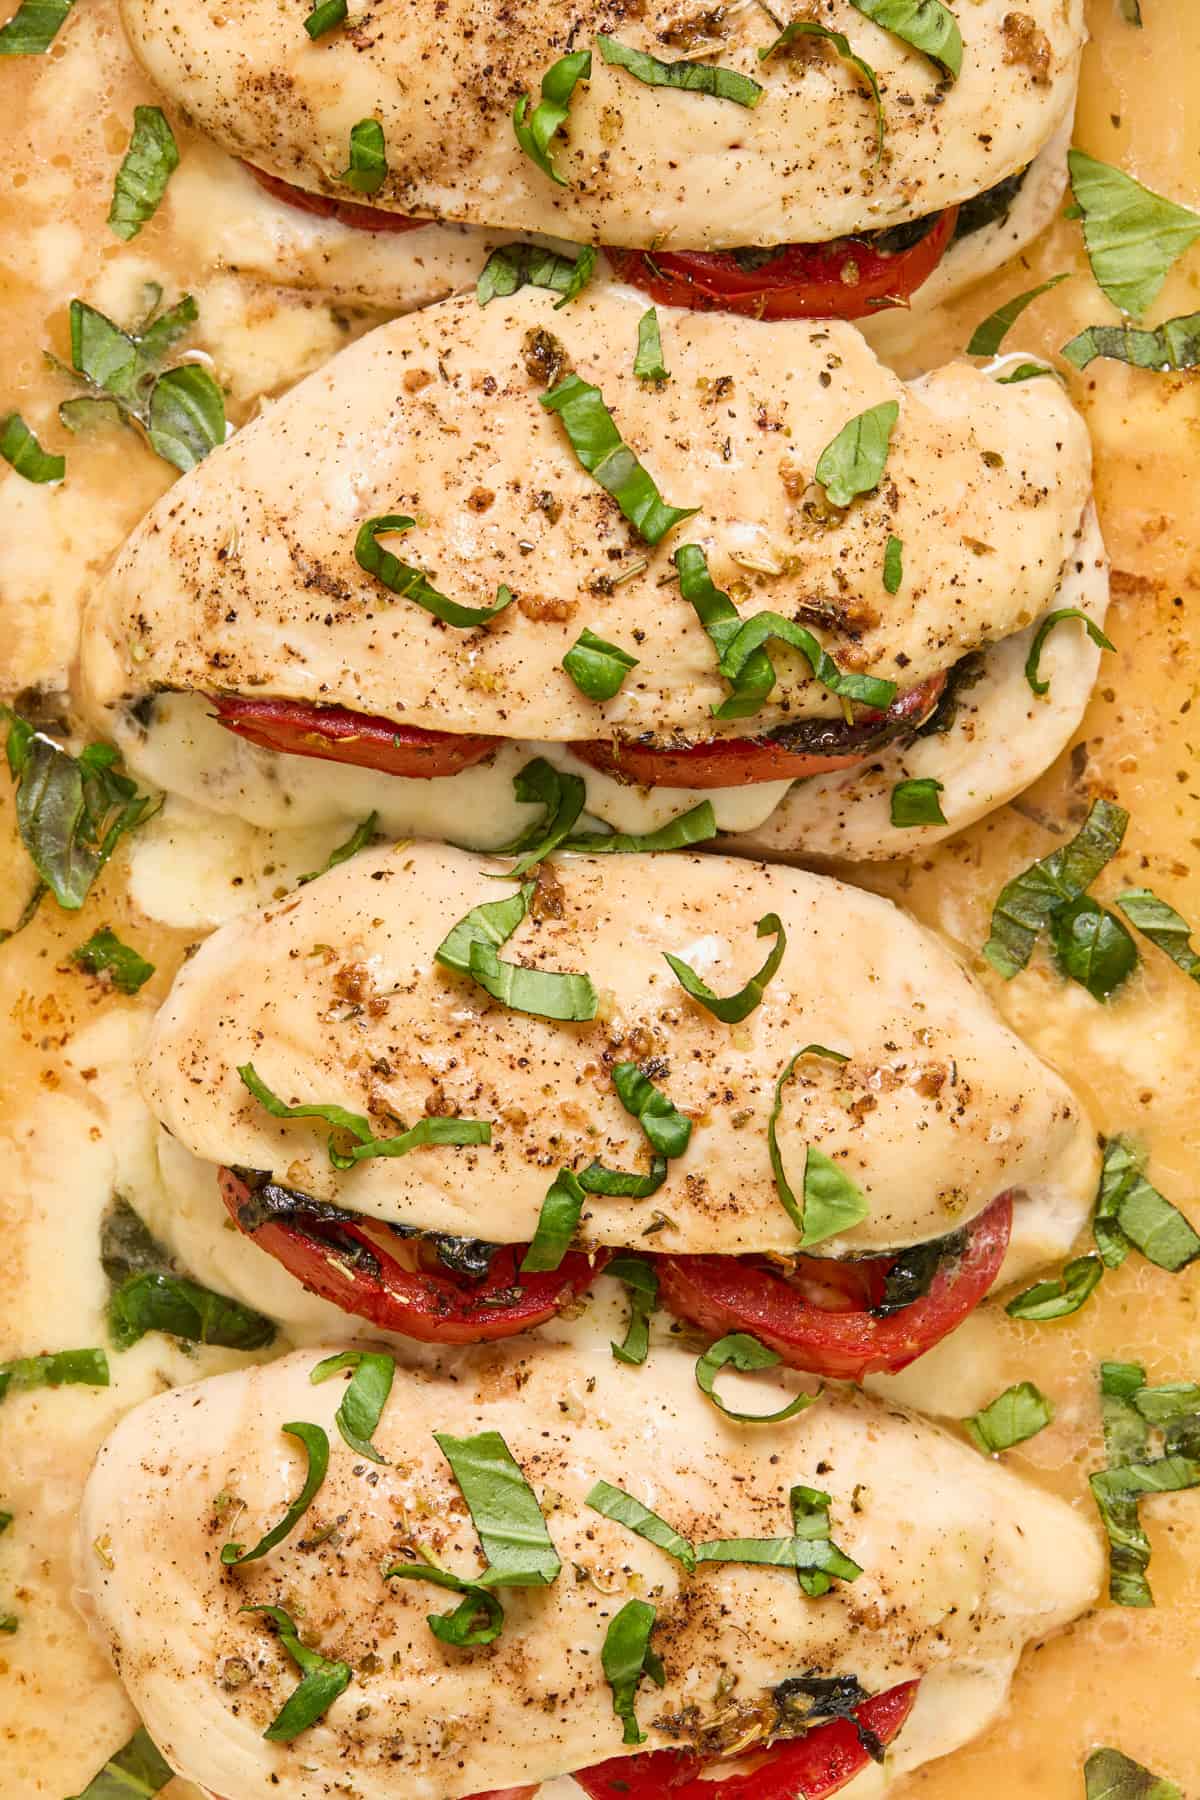 Chicken breast in baking pan with tomato and mozzarella.